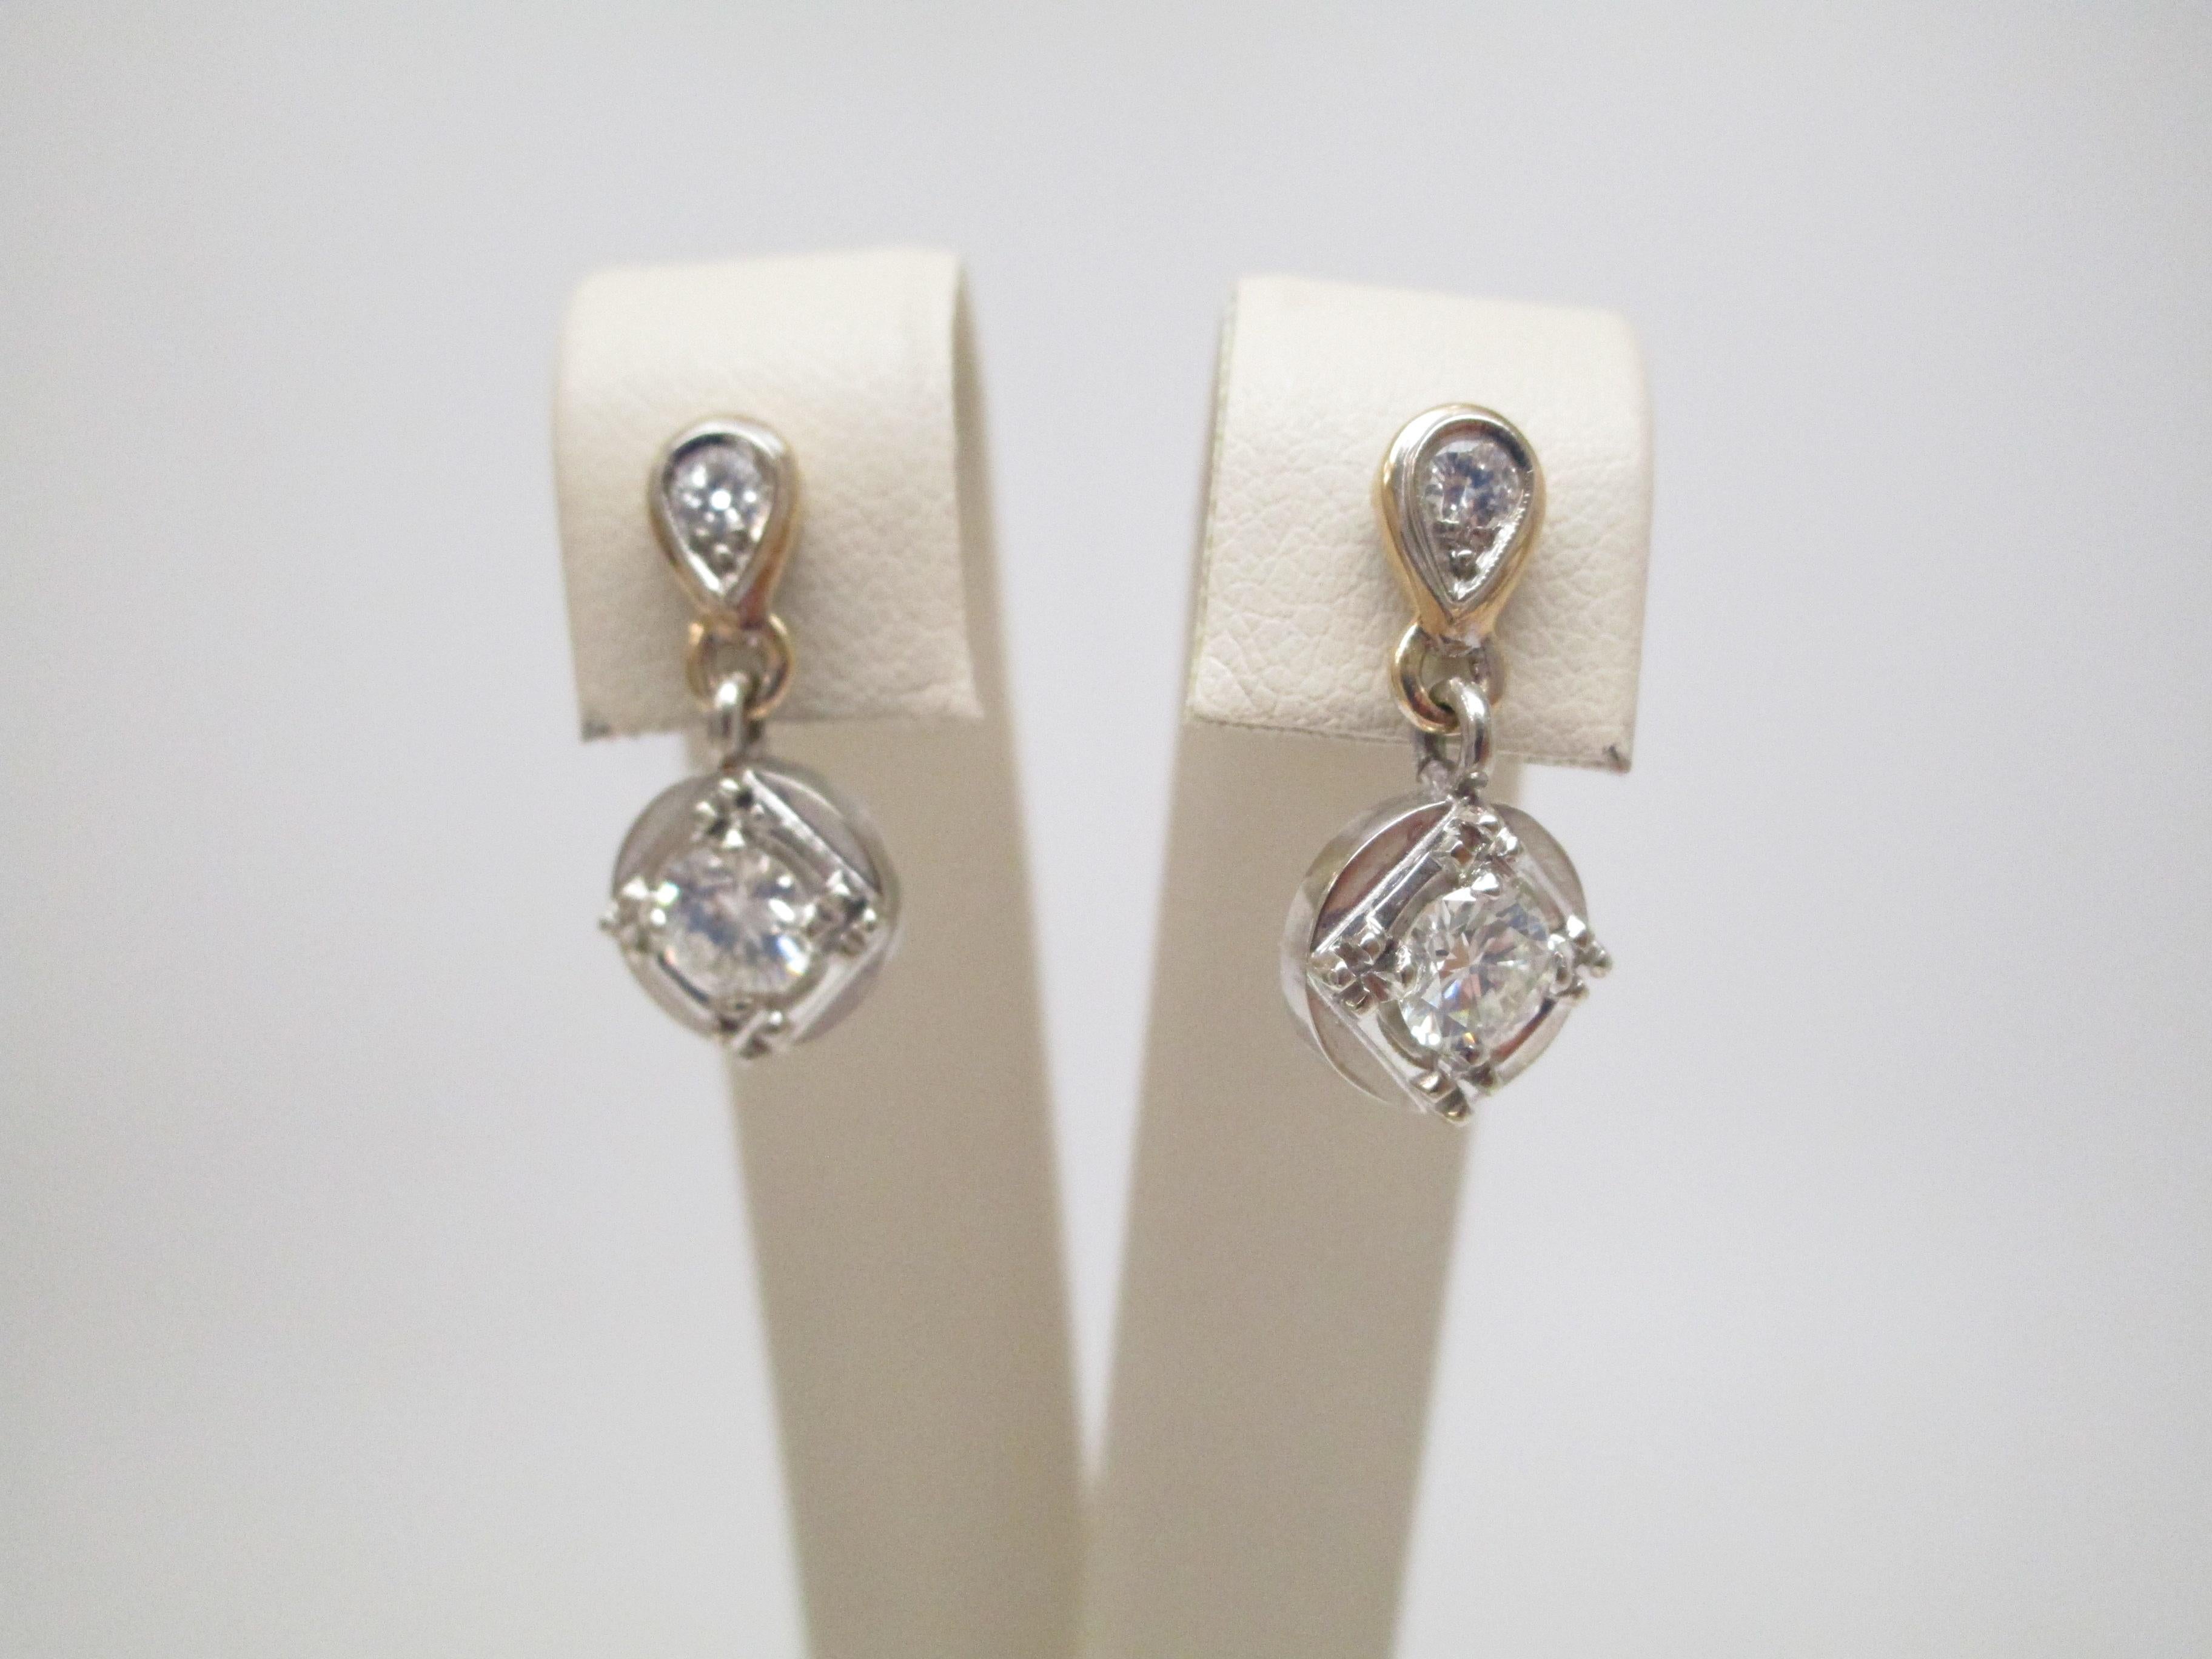 Two-Tone Gold 1950s Retro Diamond Dangle Earrings In Excellent Condition For Sale In Lexington, KY